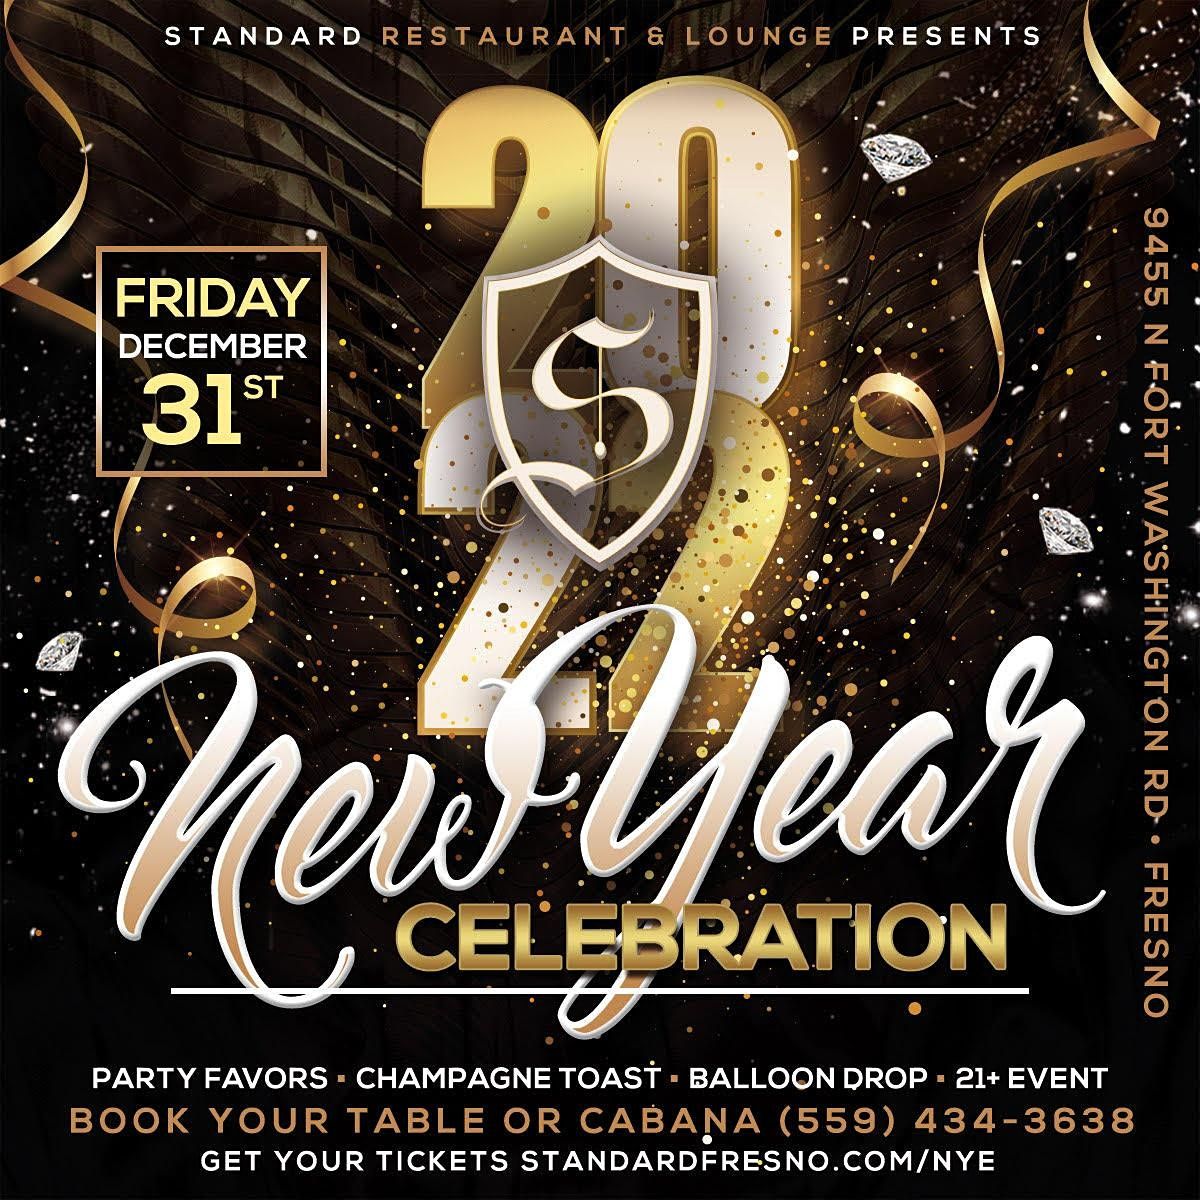 2021 Fresno New Years Eve Party at The Standard, The Standard